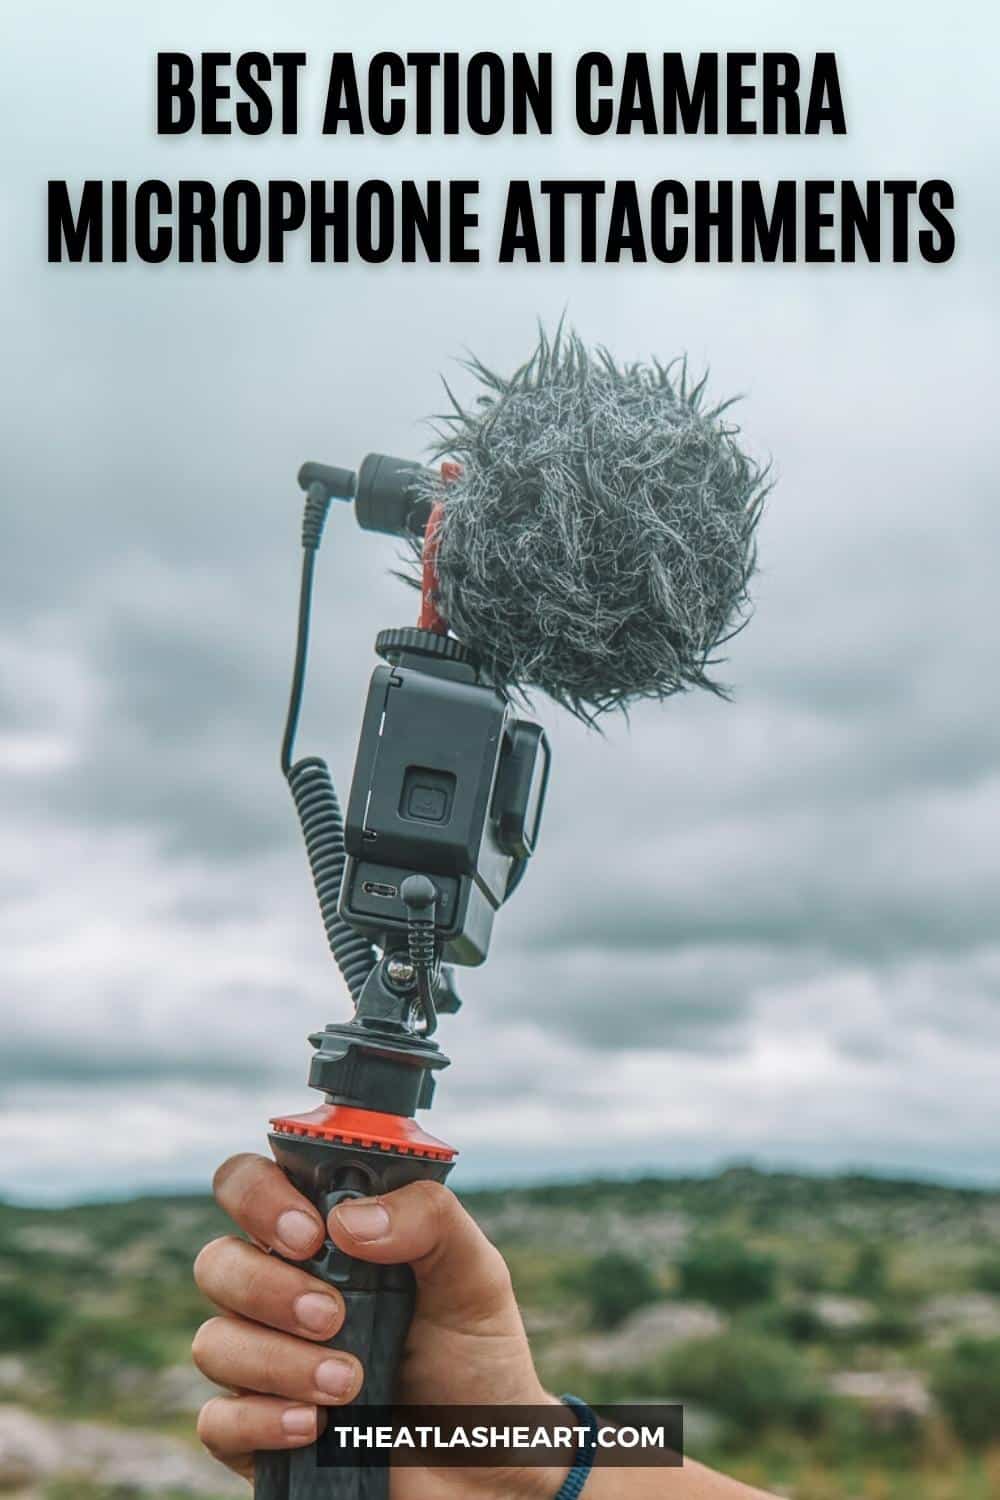 11 Best Action Camera Microphone Attachments for Top-Notch Audio [GoPro, DJI, Drift]